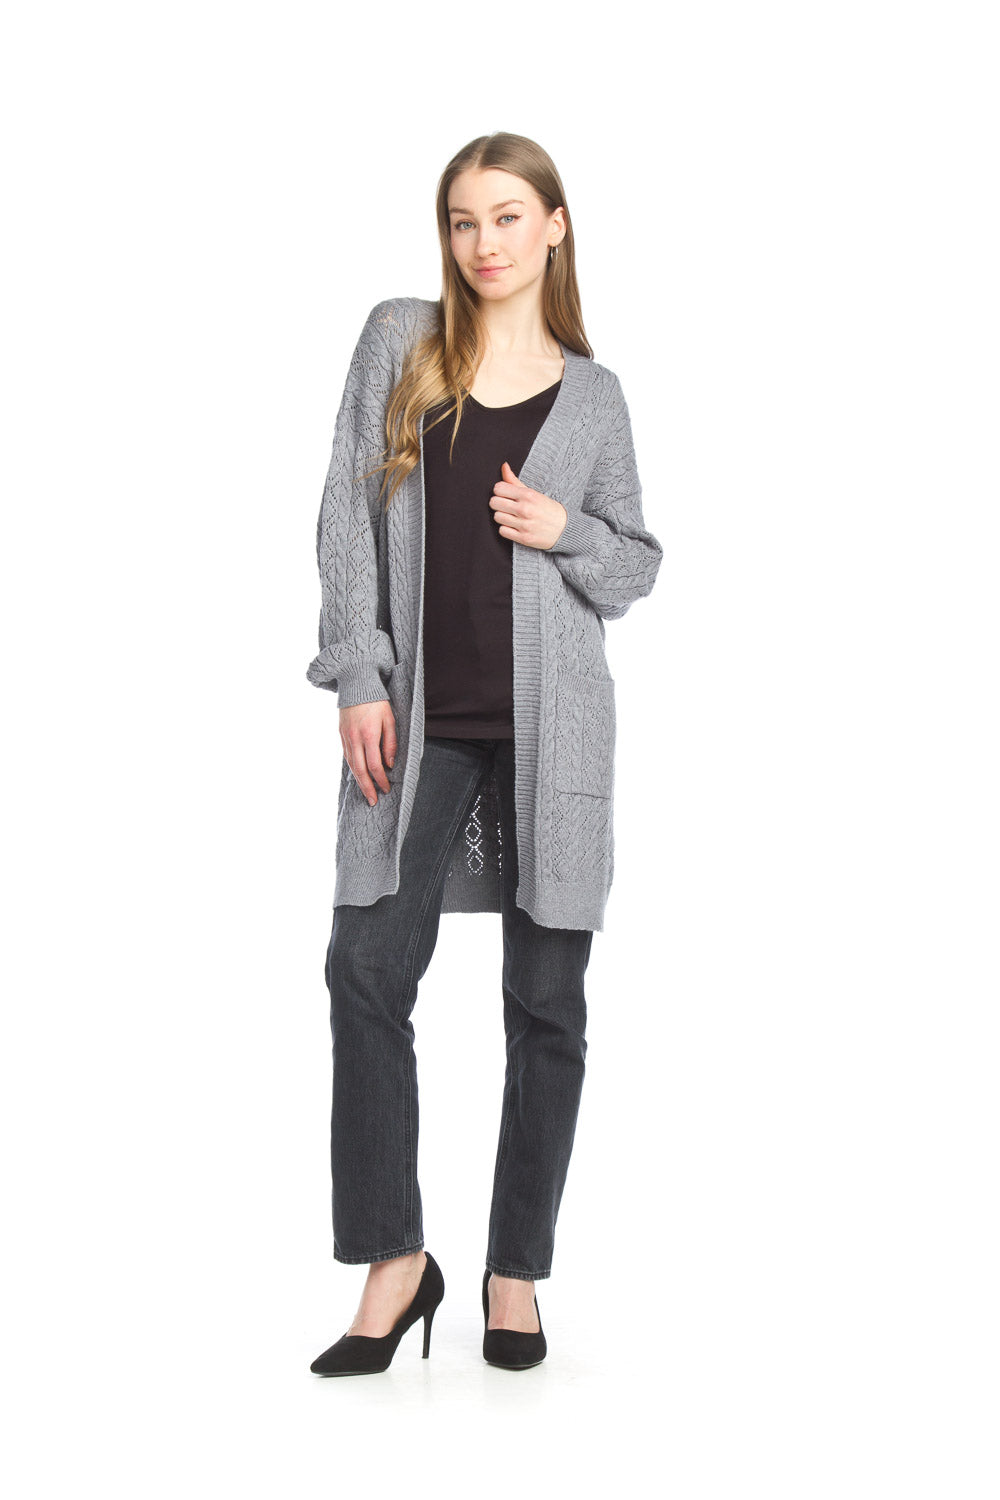 ST-15209 - Cable Knitted Cardigan with Pockets